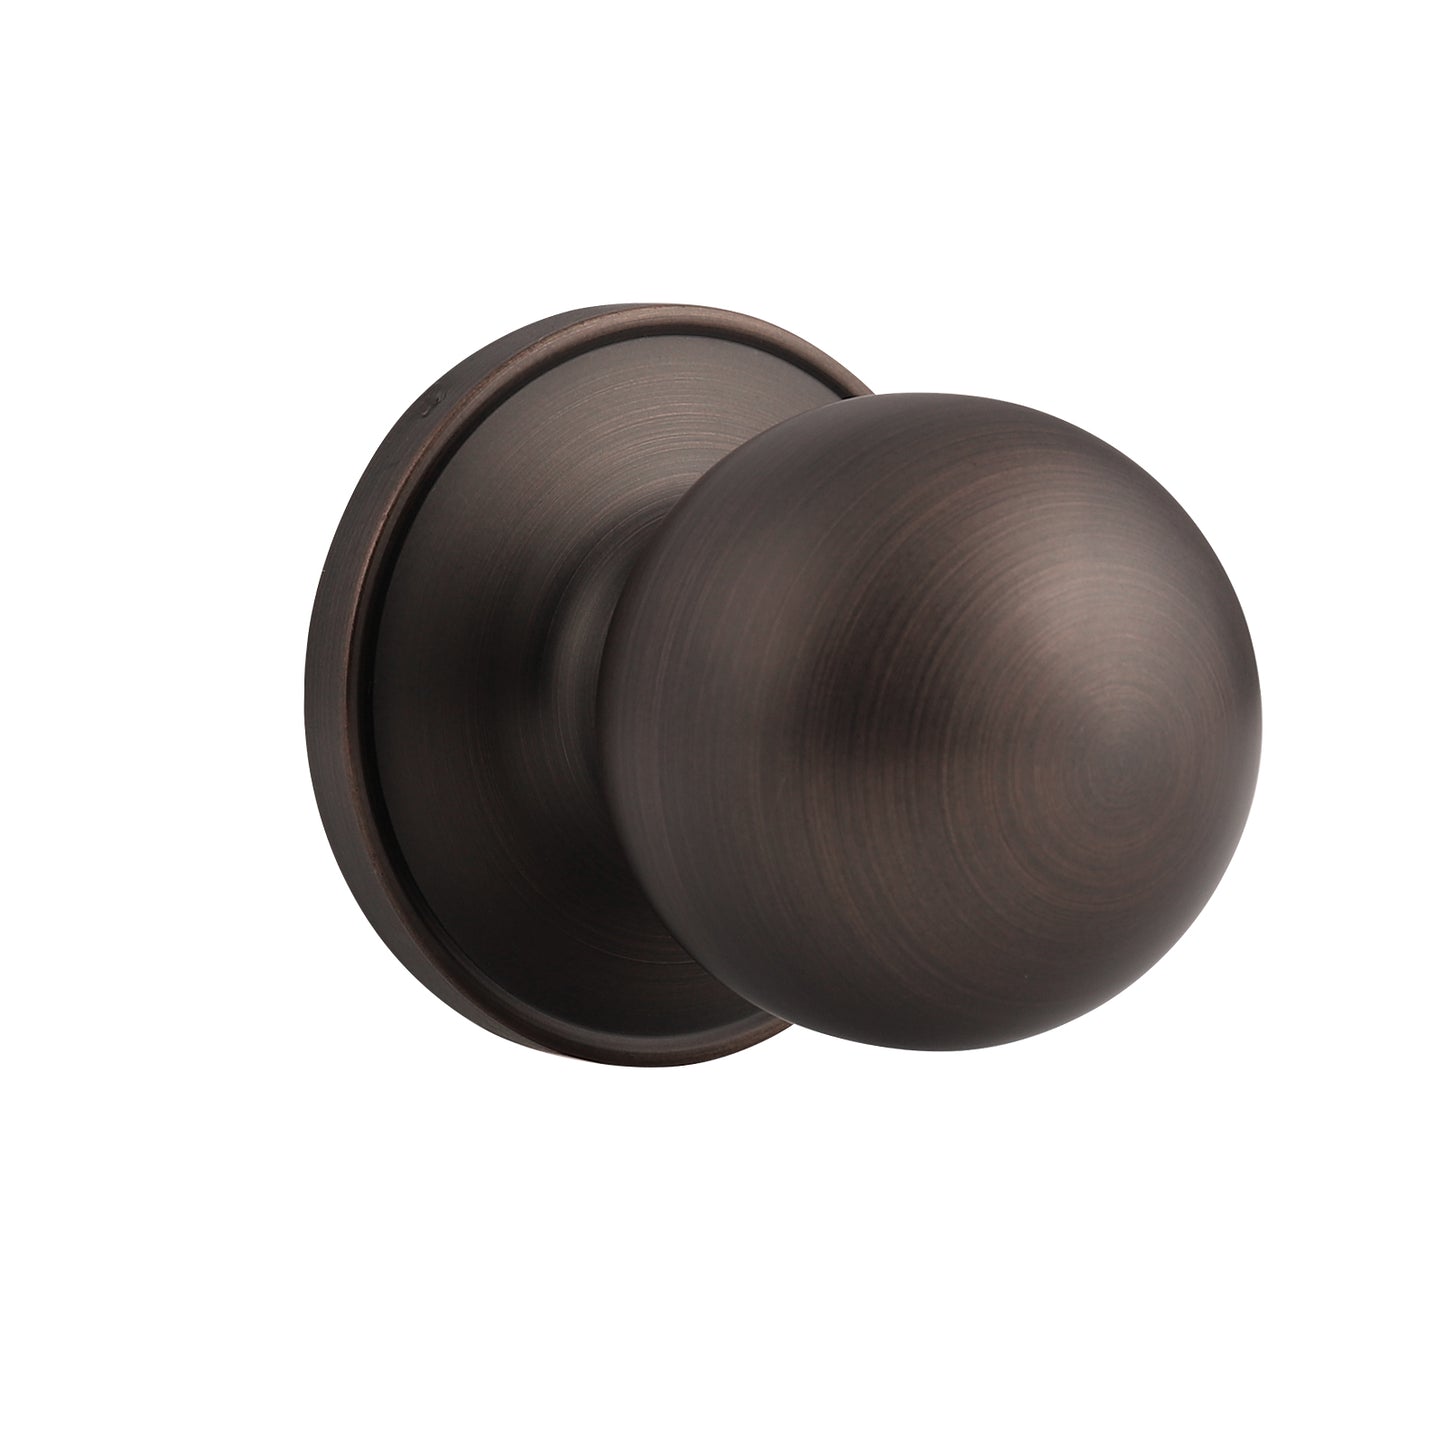 Passage Door Knobs Oil Rubbed Bronze Finish, Rould Knob Style DL607ORBPS - Probrico